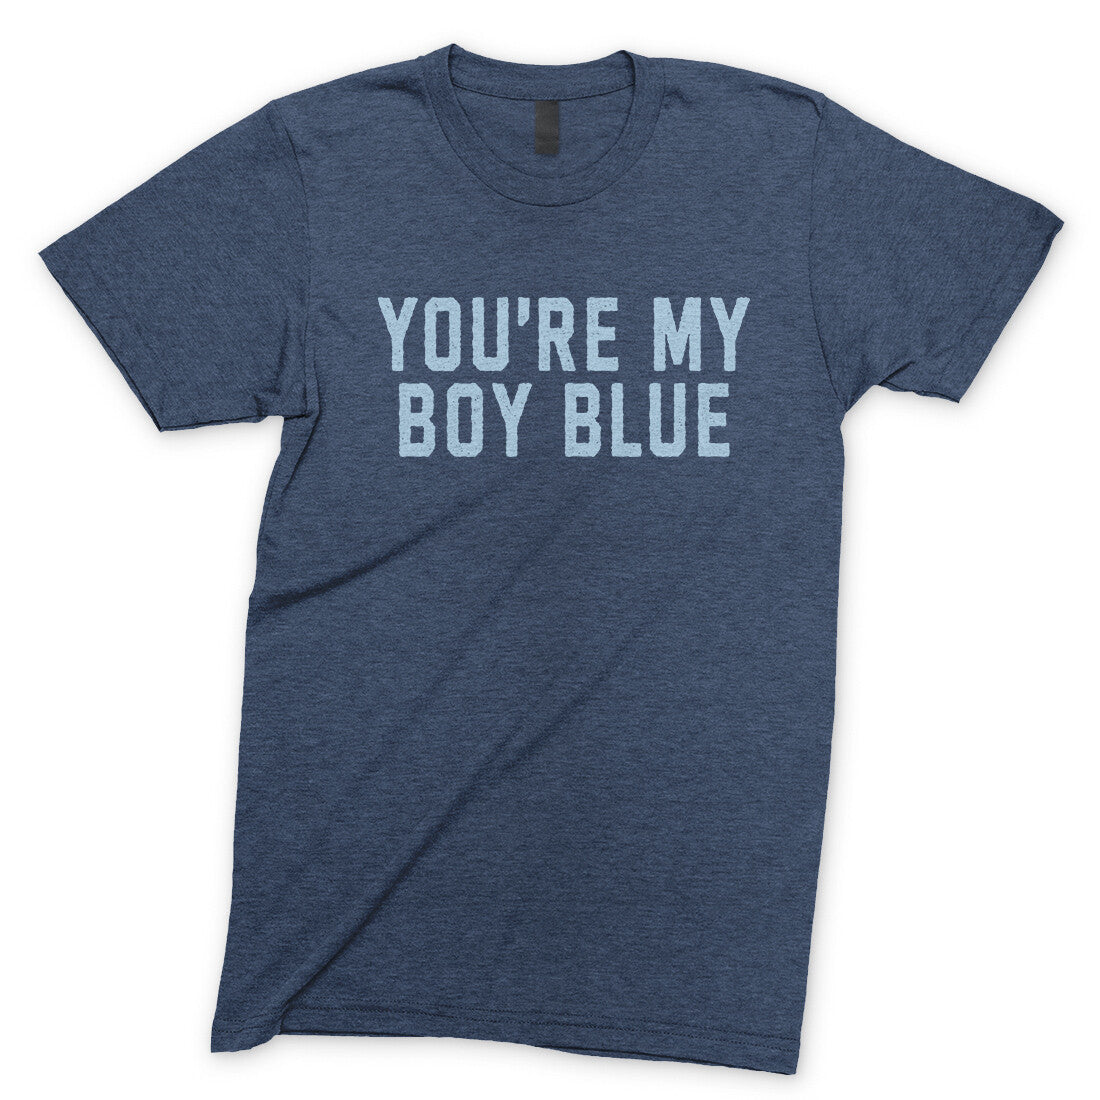 You're my Boy Blue in Navy Heather Color